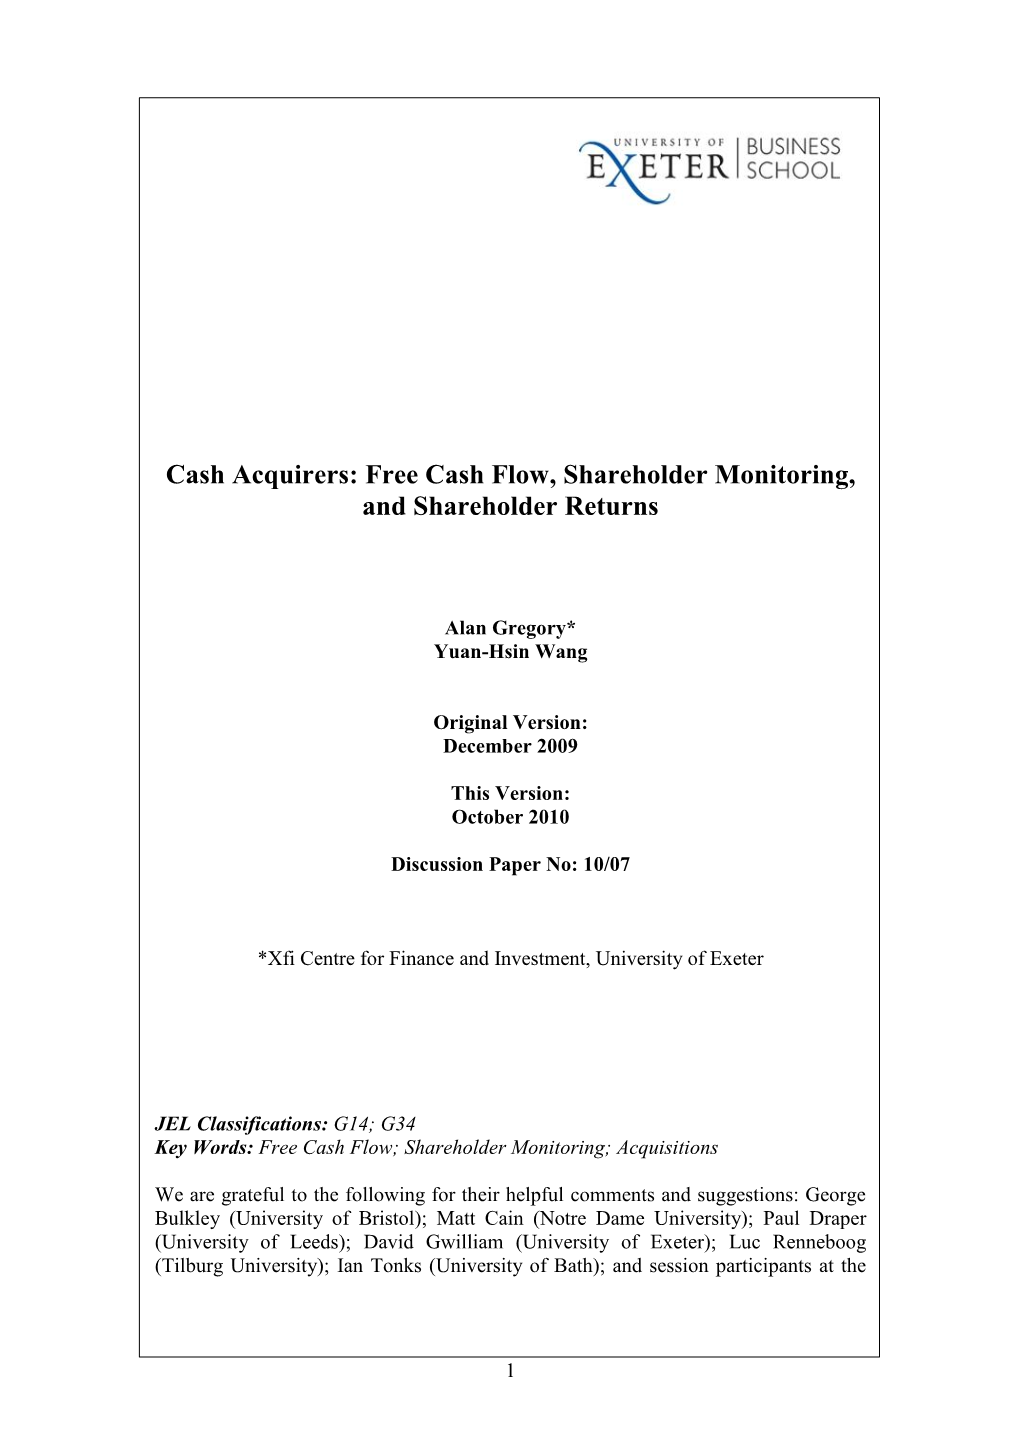 Cash Acquirers: Sources of Funding, Free Cash Flow, and Shareholder